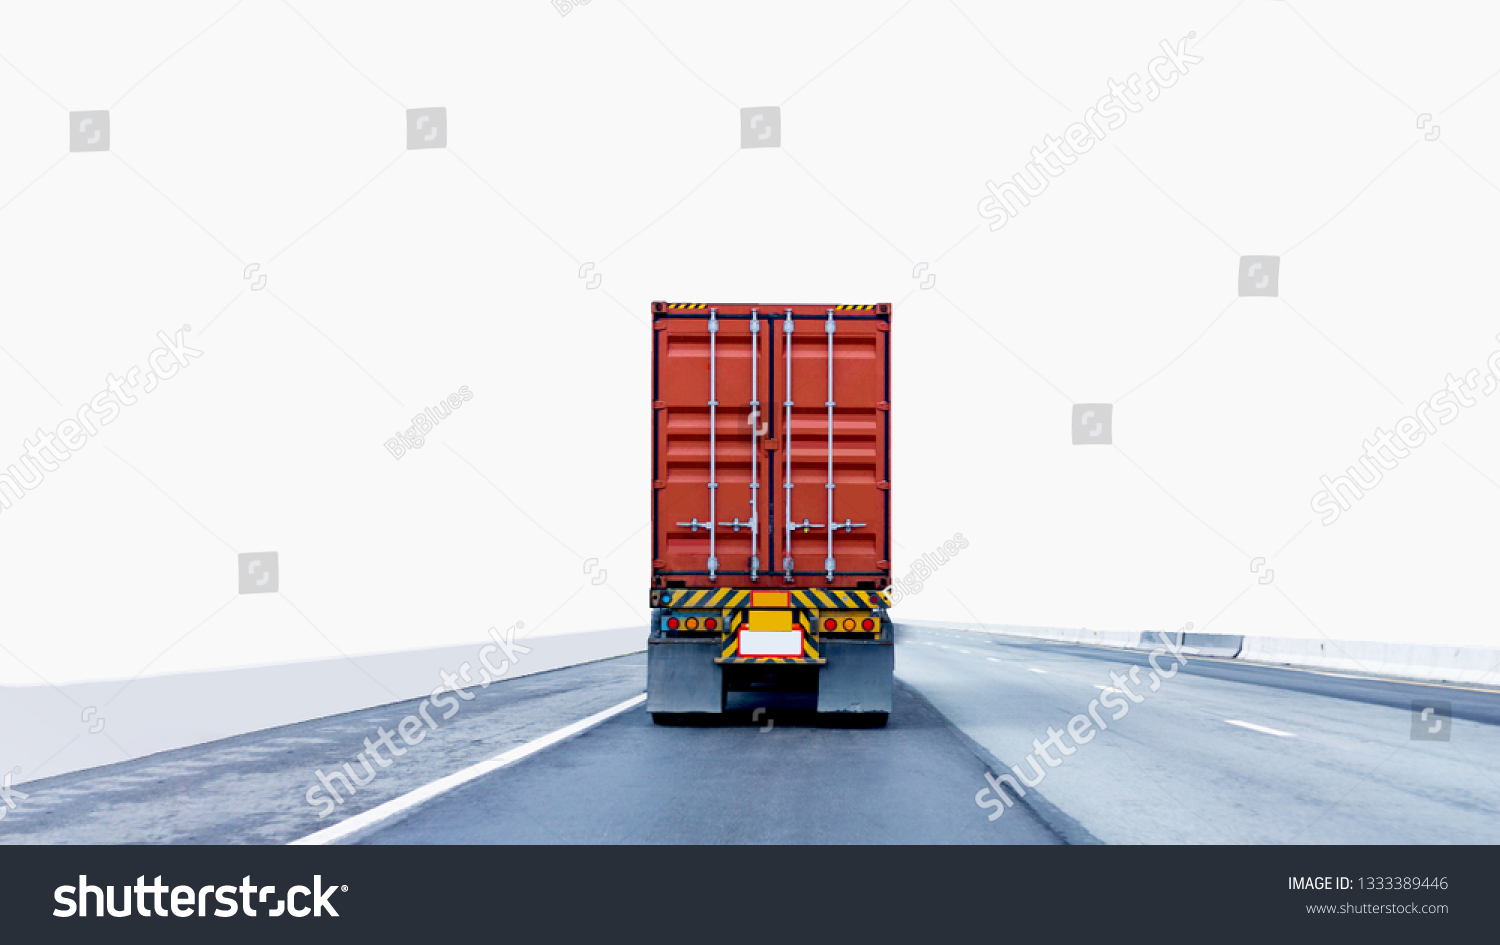 Back view of Truck on road with red container, transportation concept,import,export logistic industrial Transporting Land transport on the expressway.on white background #1333389446